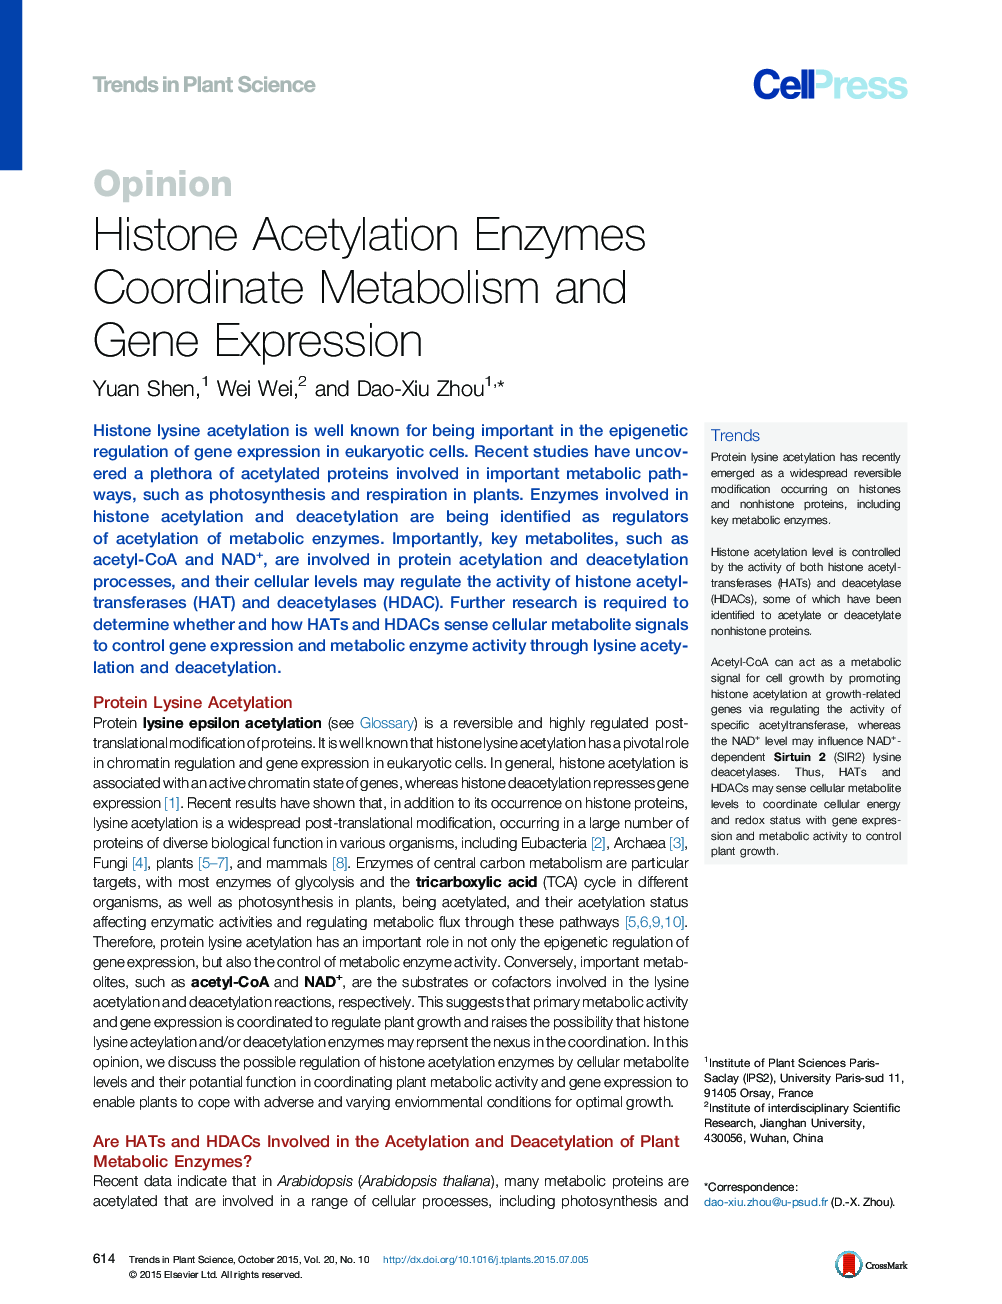 Histone Acetylation Enzymes Coordinate Metabolism and Gene Expression